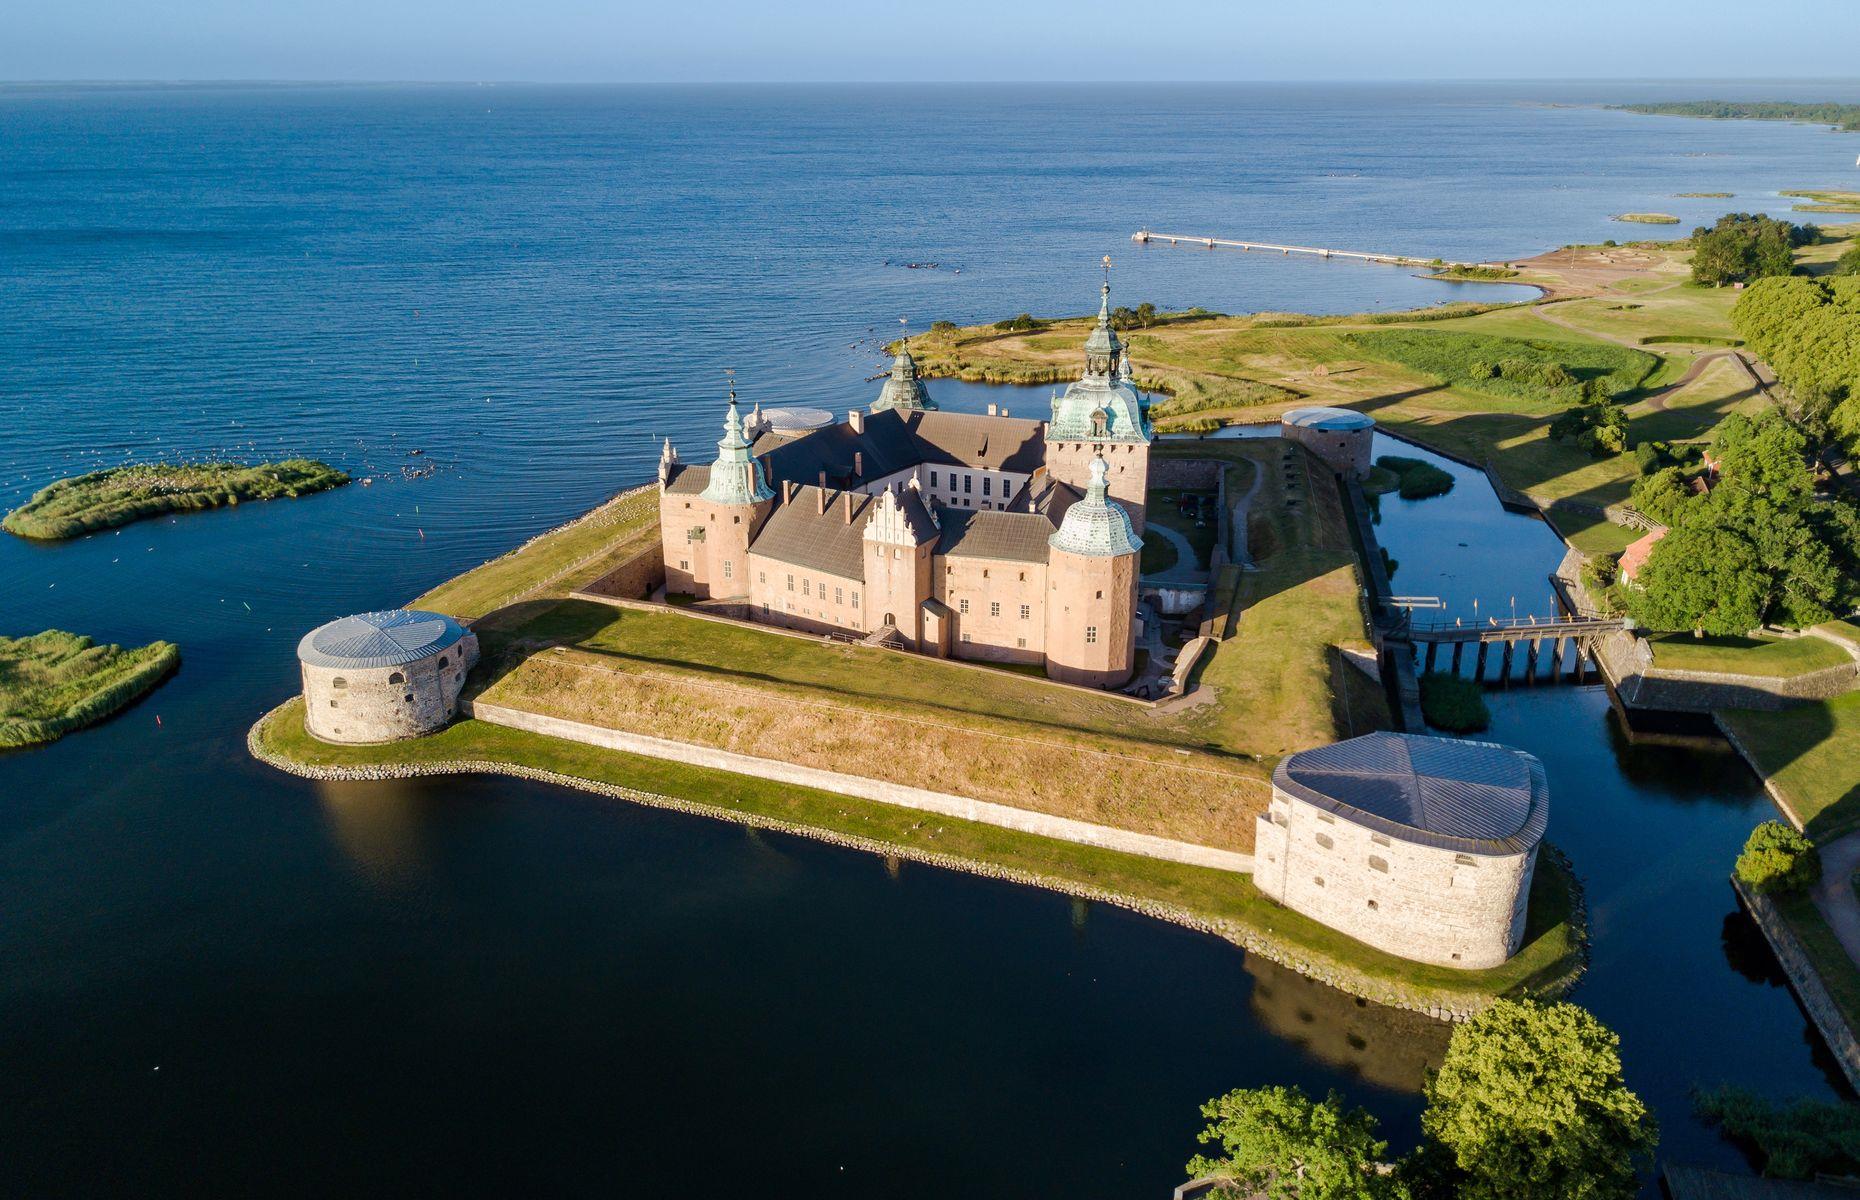 <p>There’s nothing quite like a castle to capture a child’s imagination and the 800-year-old <a href="https://kalmarslott.se/en/">Kalmar Castle</a>, complete with turrets and drawbridge and spectacularly located on an islet on the Baltic coast, is one of the most family-friendly you’ll find. In summertime, the whole castle transforms into a child's paradise, where activities include dressing up as royalty with the staff, learning to joust, challenging a dragon and stargazing from the turrets. Should children complete their challenges, they'll be rewarded with a knighthood ceremony in the Great Hall. It's worth noting that the castle is only open on weekends, from 11am to 3pm.</p>